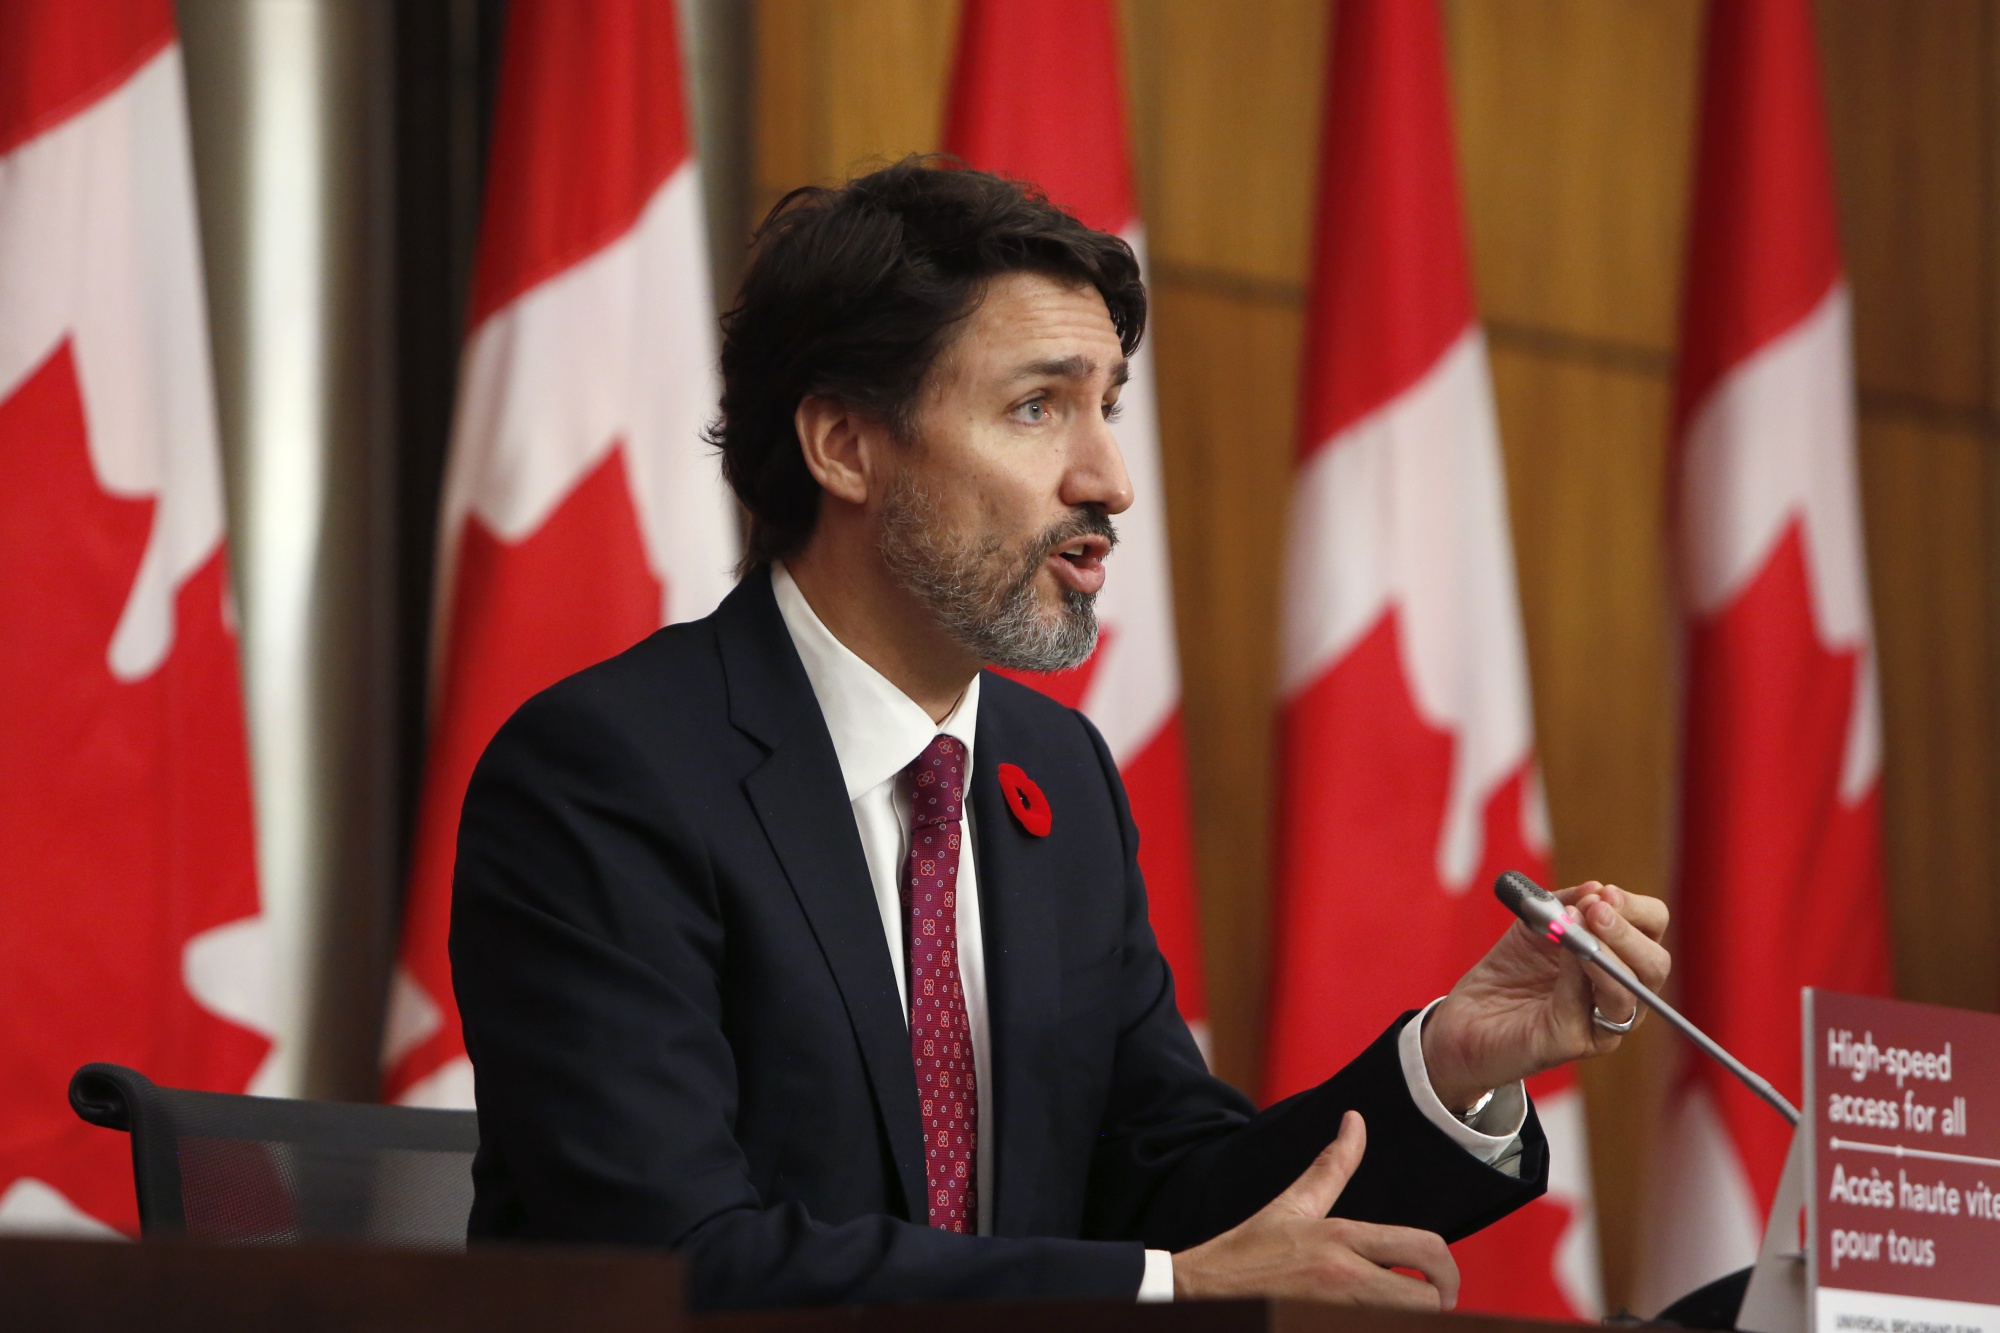 Justin Trudeau speaks during an Ottawa news conference on Nov. 9.